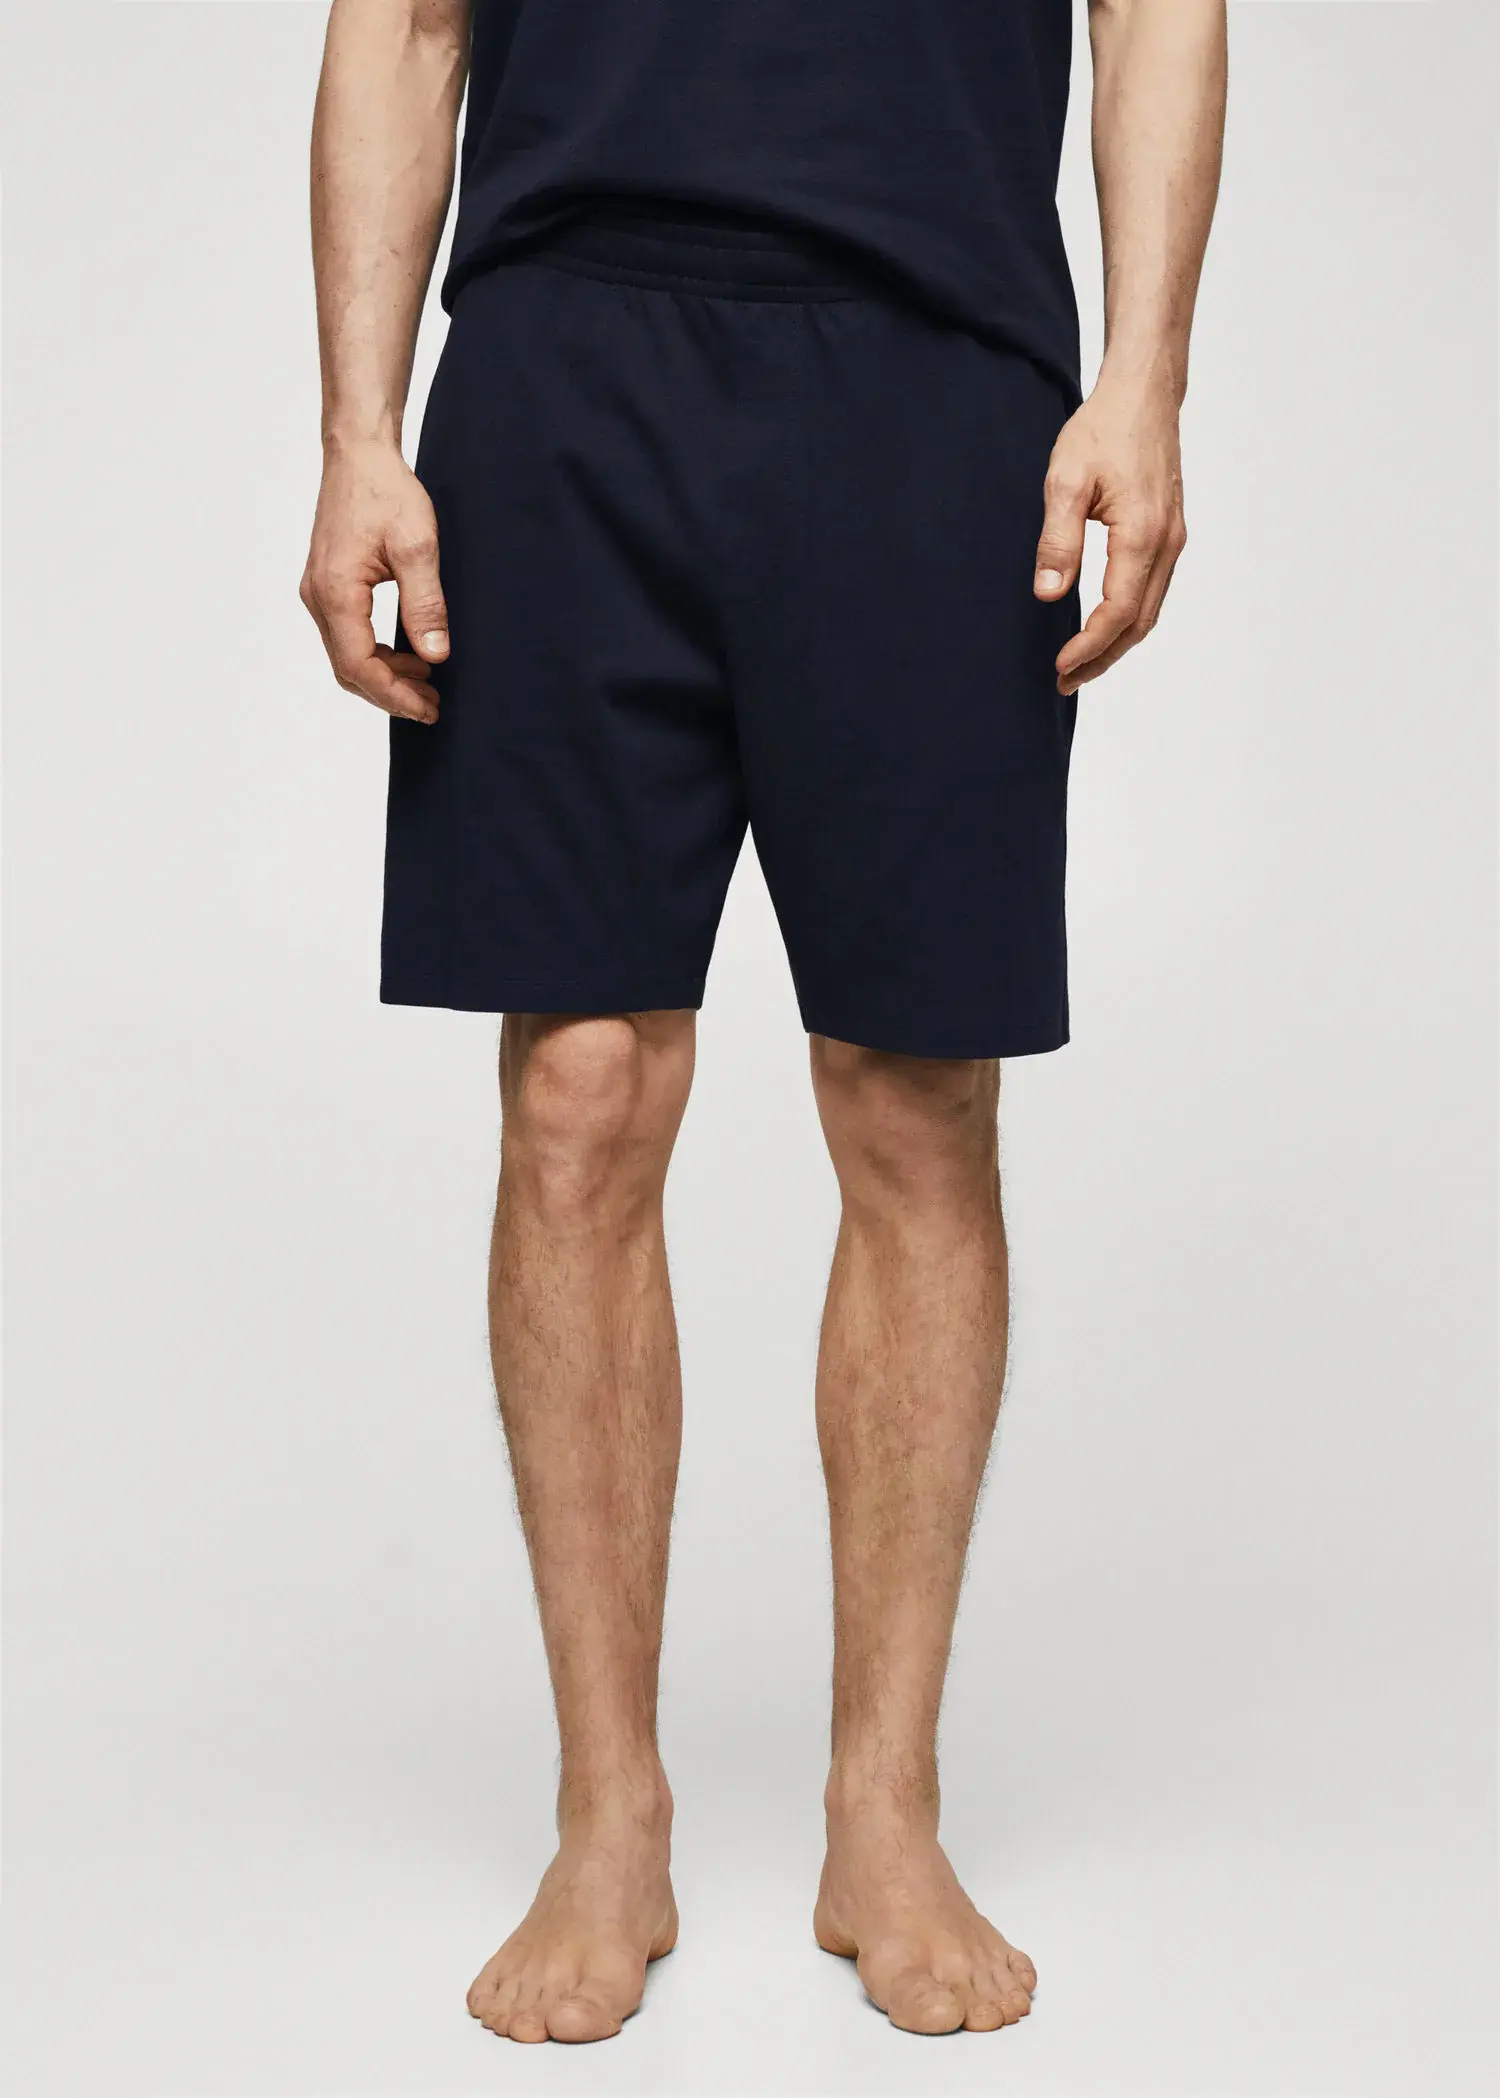 Mango Cotton pyjama shorts pack. a man in black shorts is standing up. 